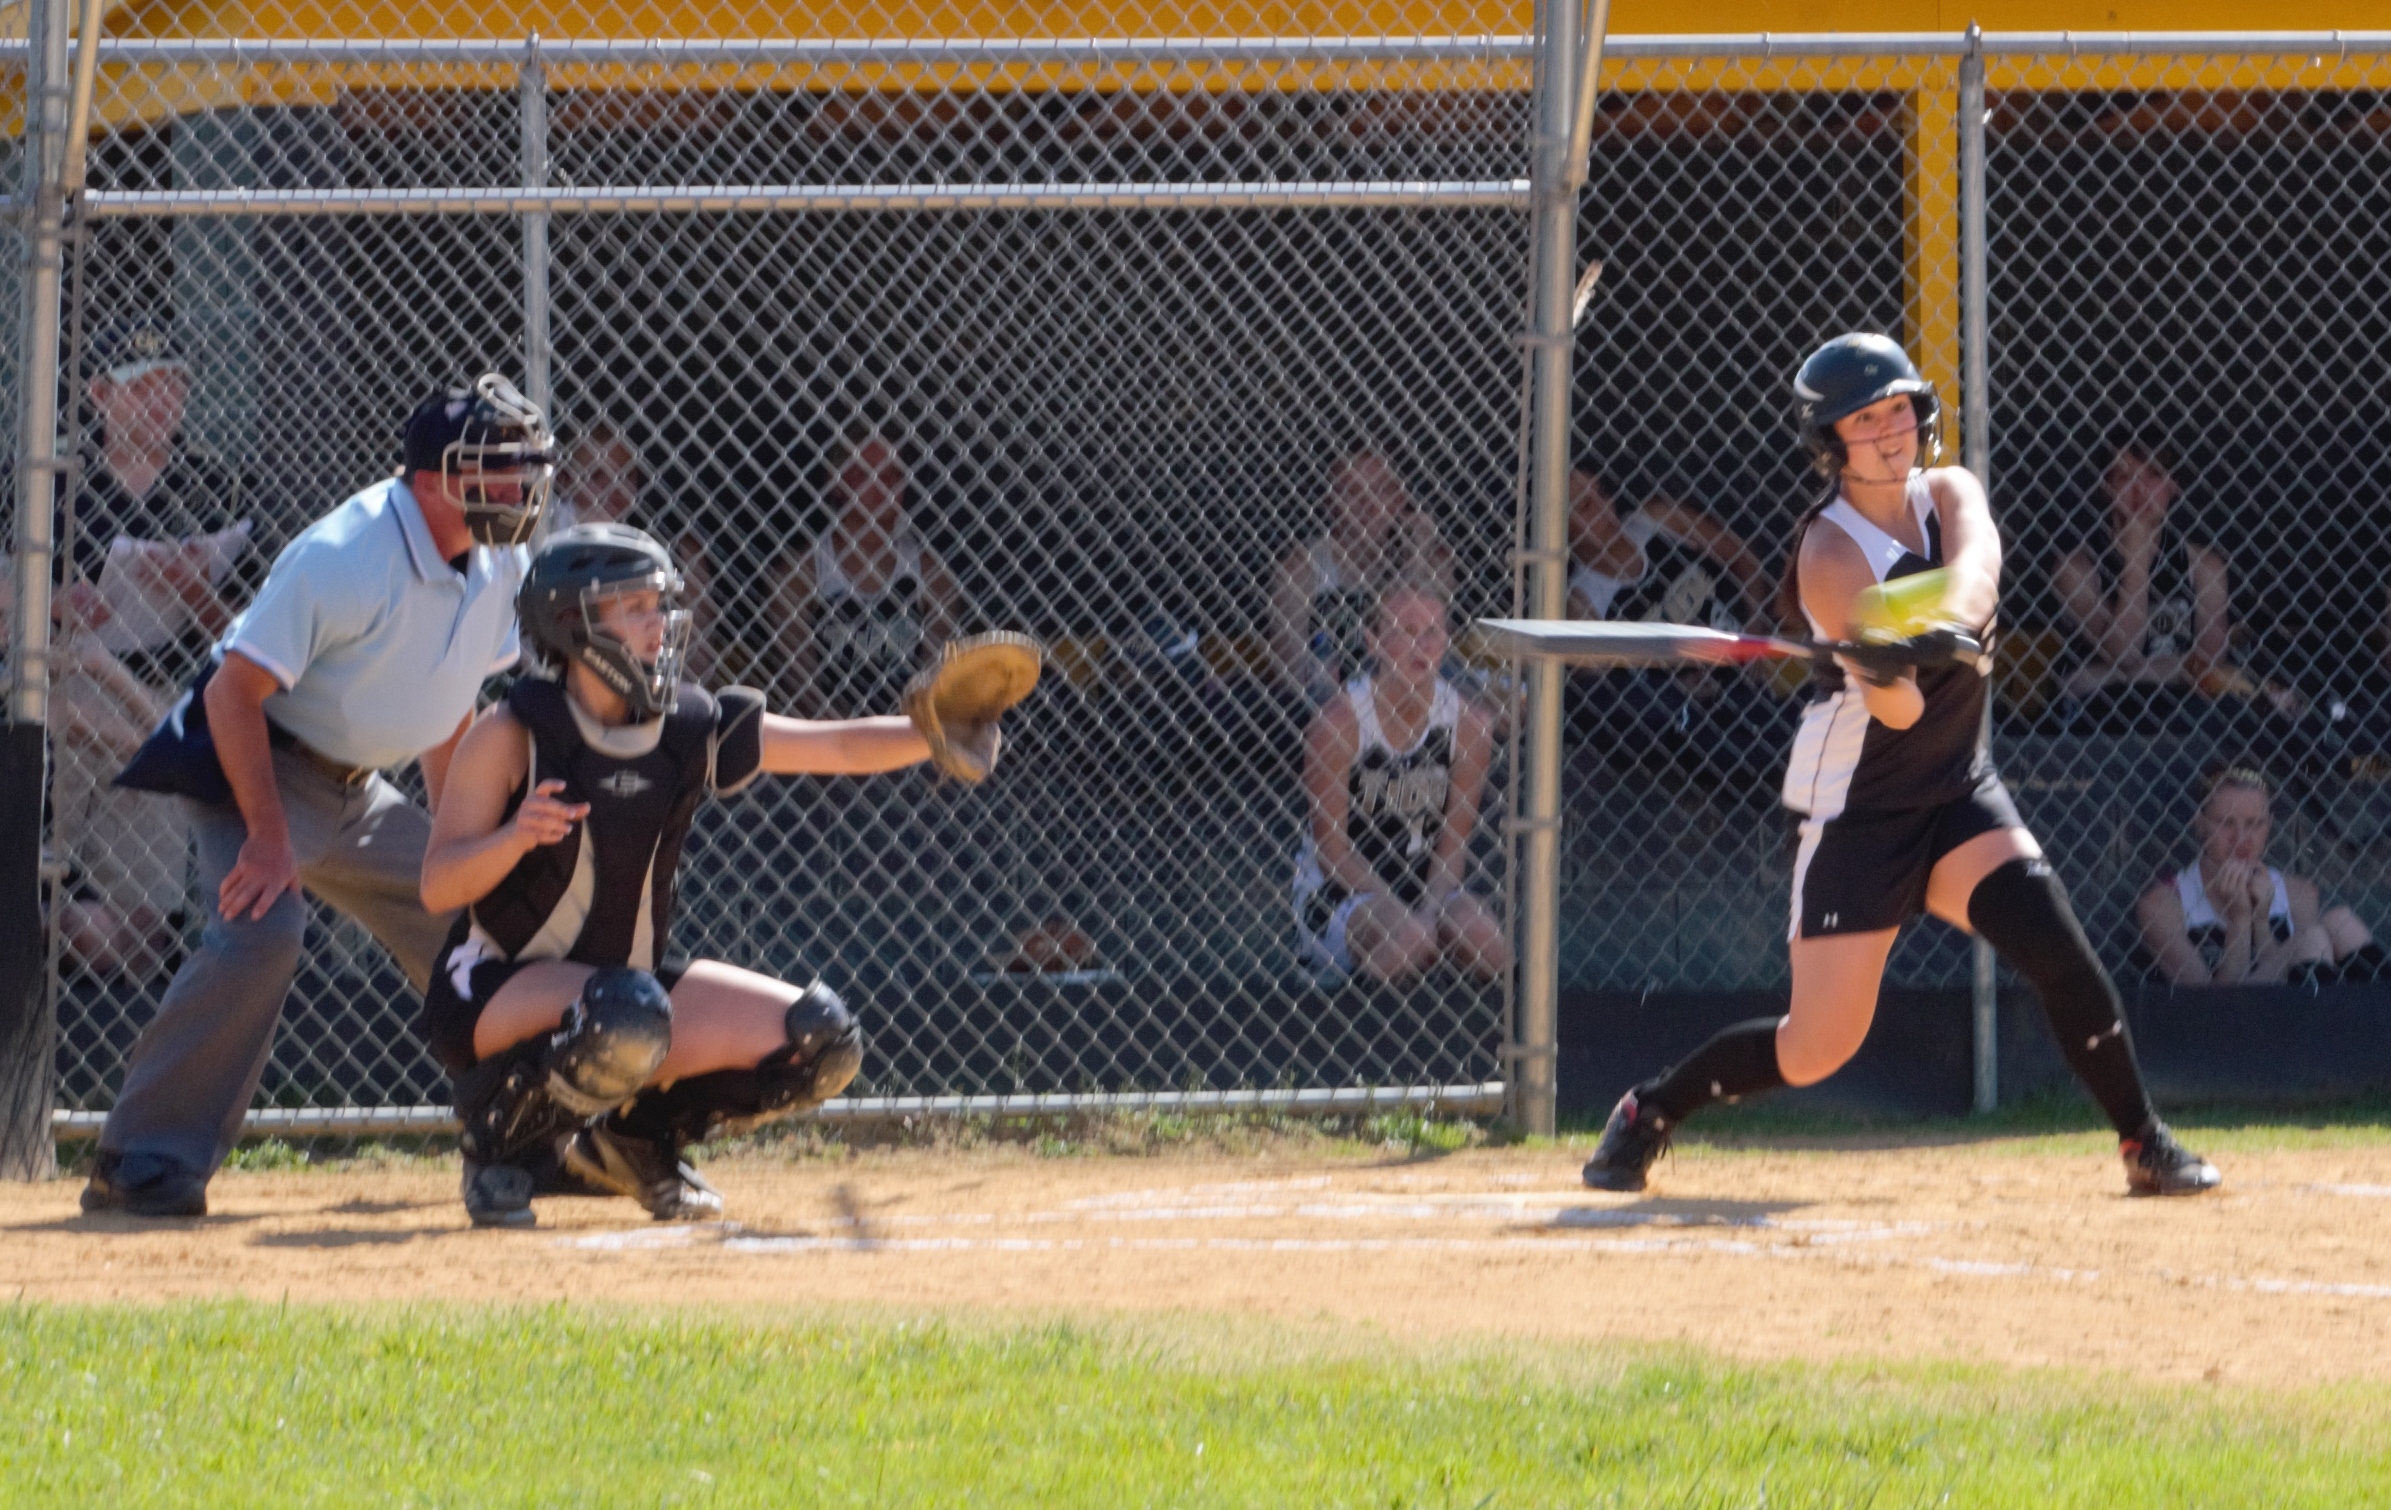 EYE ON THE BALL - Curwensville's Abby Johnson is set to connect on one of her three hits in an 11-2 win over Moshannon Valley on Friday.